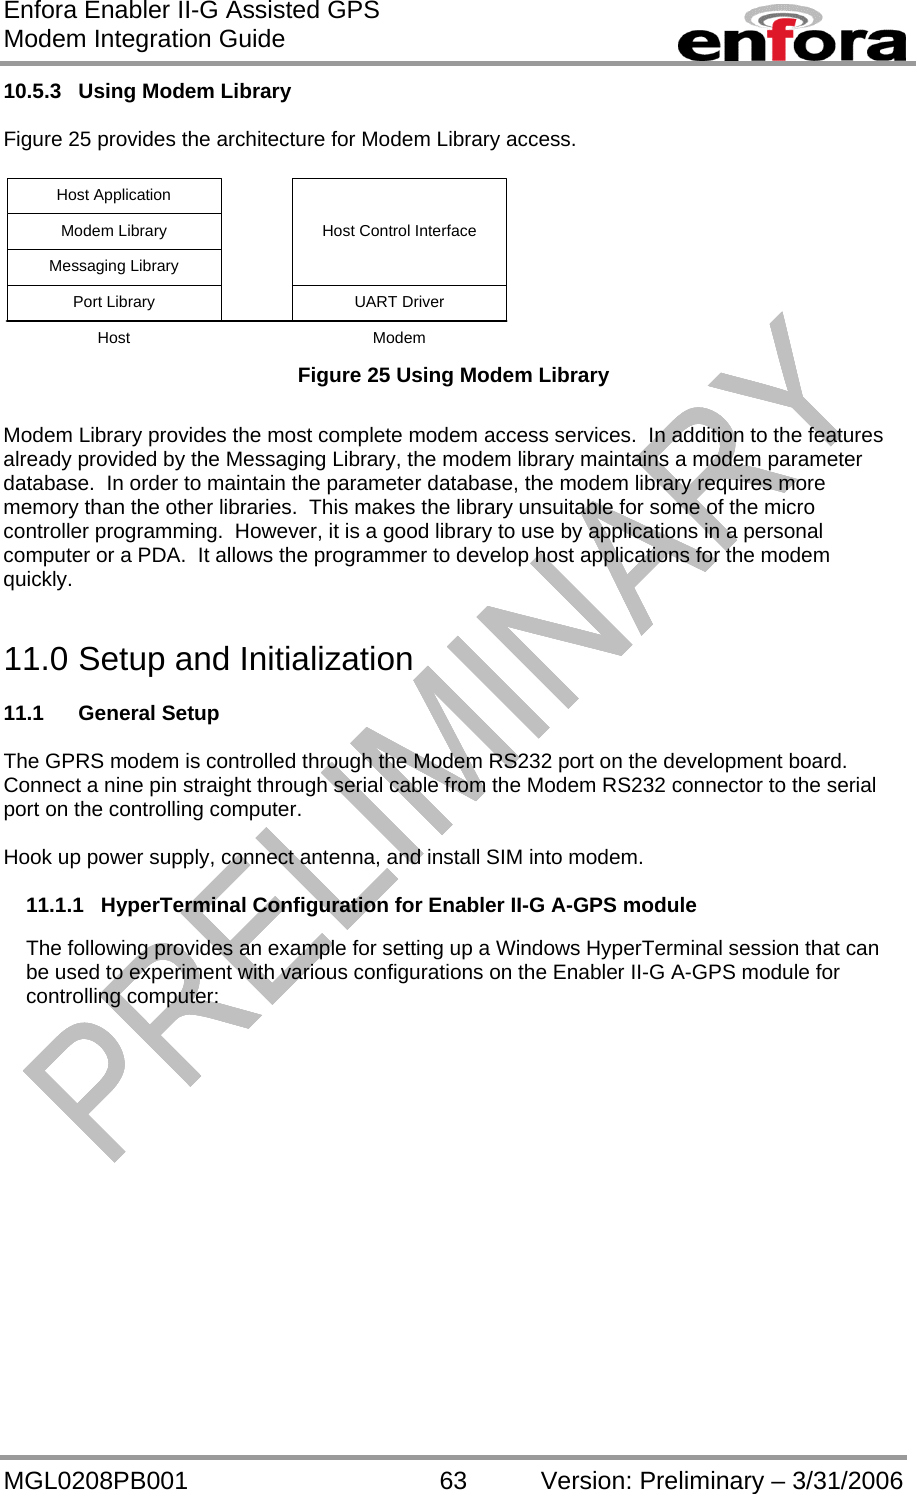 Enfora Enabler II-G Assisted GPS Modem Integration Guide MGL0208PB001 63 Version: Preliminary – 3/31/2006 10.5.3  Using Modem Library   Figure 25 provides the architecture for Modem Library access.  UART DriverPort LibraryHost Control InterfaceMessaging LibraryModem LibraryHost ApplicationHost Modem  Figure 25 Using Modem Library  Modem Library provides the most complete modem access services.  In addition to the features already provided by the Messaging Library, the modem library maintains a modem parameter database.  In order to maintain the parameter database, the modem library requires more memory than the other libraries.  This makes the library unsuitable for some of the micro controller programming.  However, it is a good library to use by applications in a personal computer or a PDA.  It allows the programmer to develop host applications for the modem quickly.   11.0 Setup and Initialization  11.1 General Setup  The GPRS modem is controlled through the Modem RS232 port on the development board.  Connect a nine pin straight through serial cable from the Modem RS232 connector to the serial port on the controlling computer.  Hook up power supply, connect antenna, and install SIM into modem.  11.1.1  HyperTerminal Configuration for Enabler II-G A-GPS module  The following provides an example for setting up a Windows HyperTerminal session that can be used to experiment with various configurations on the Enabler II-G A-GPS module for controlling computer: 